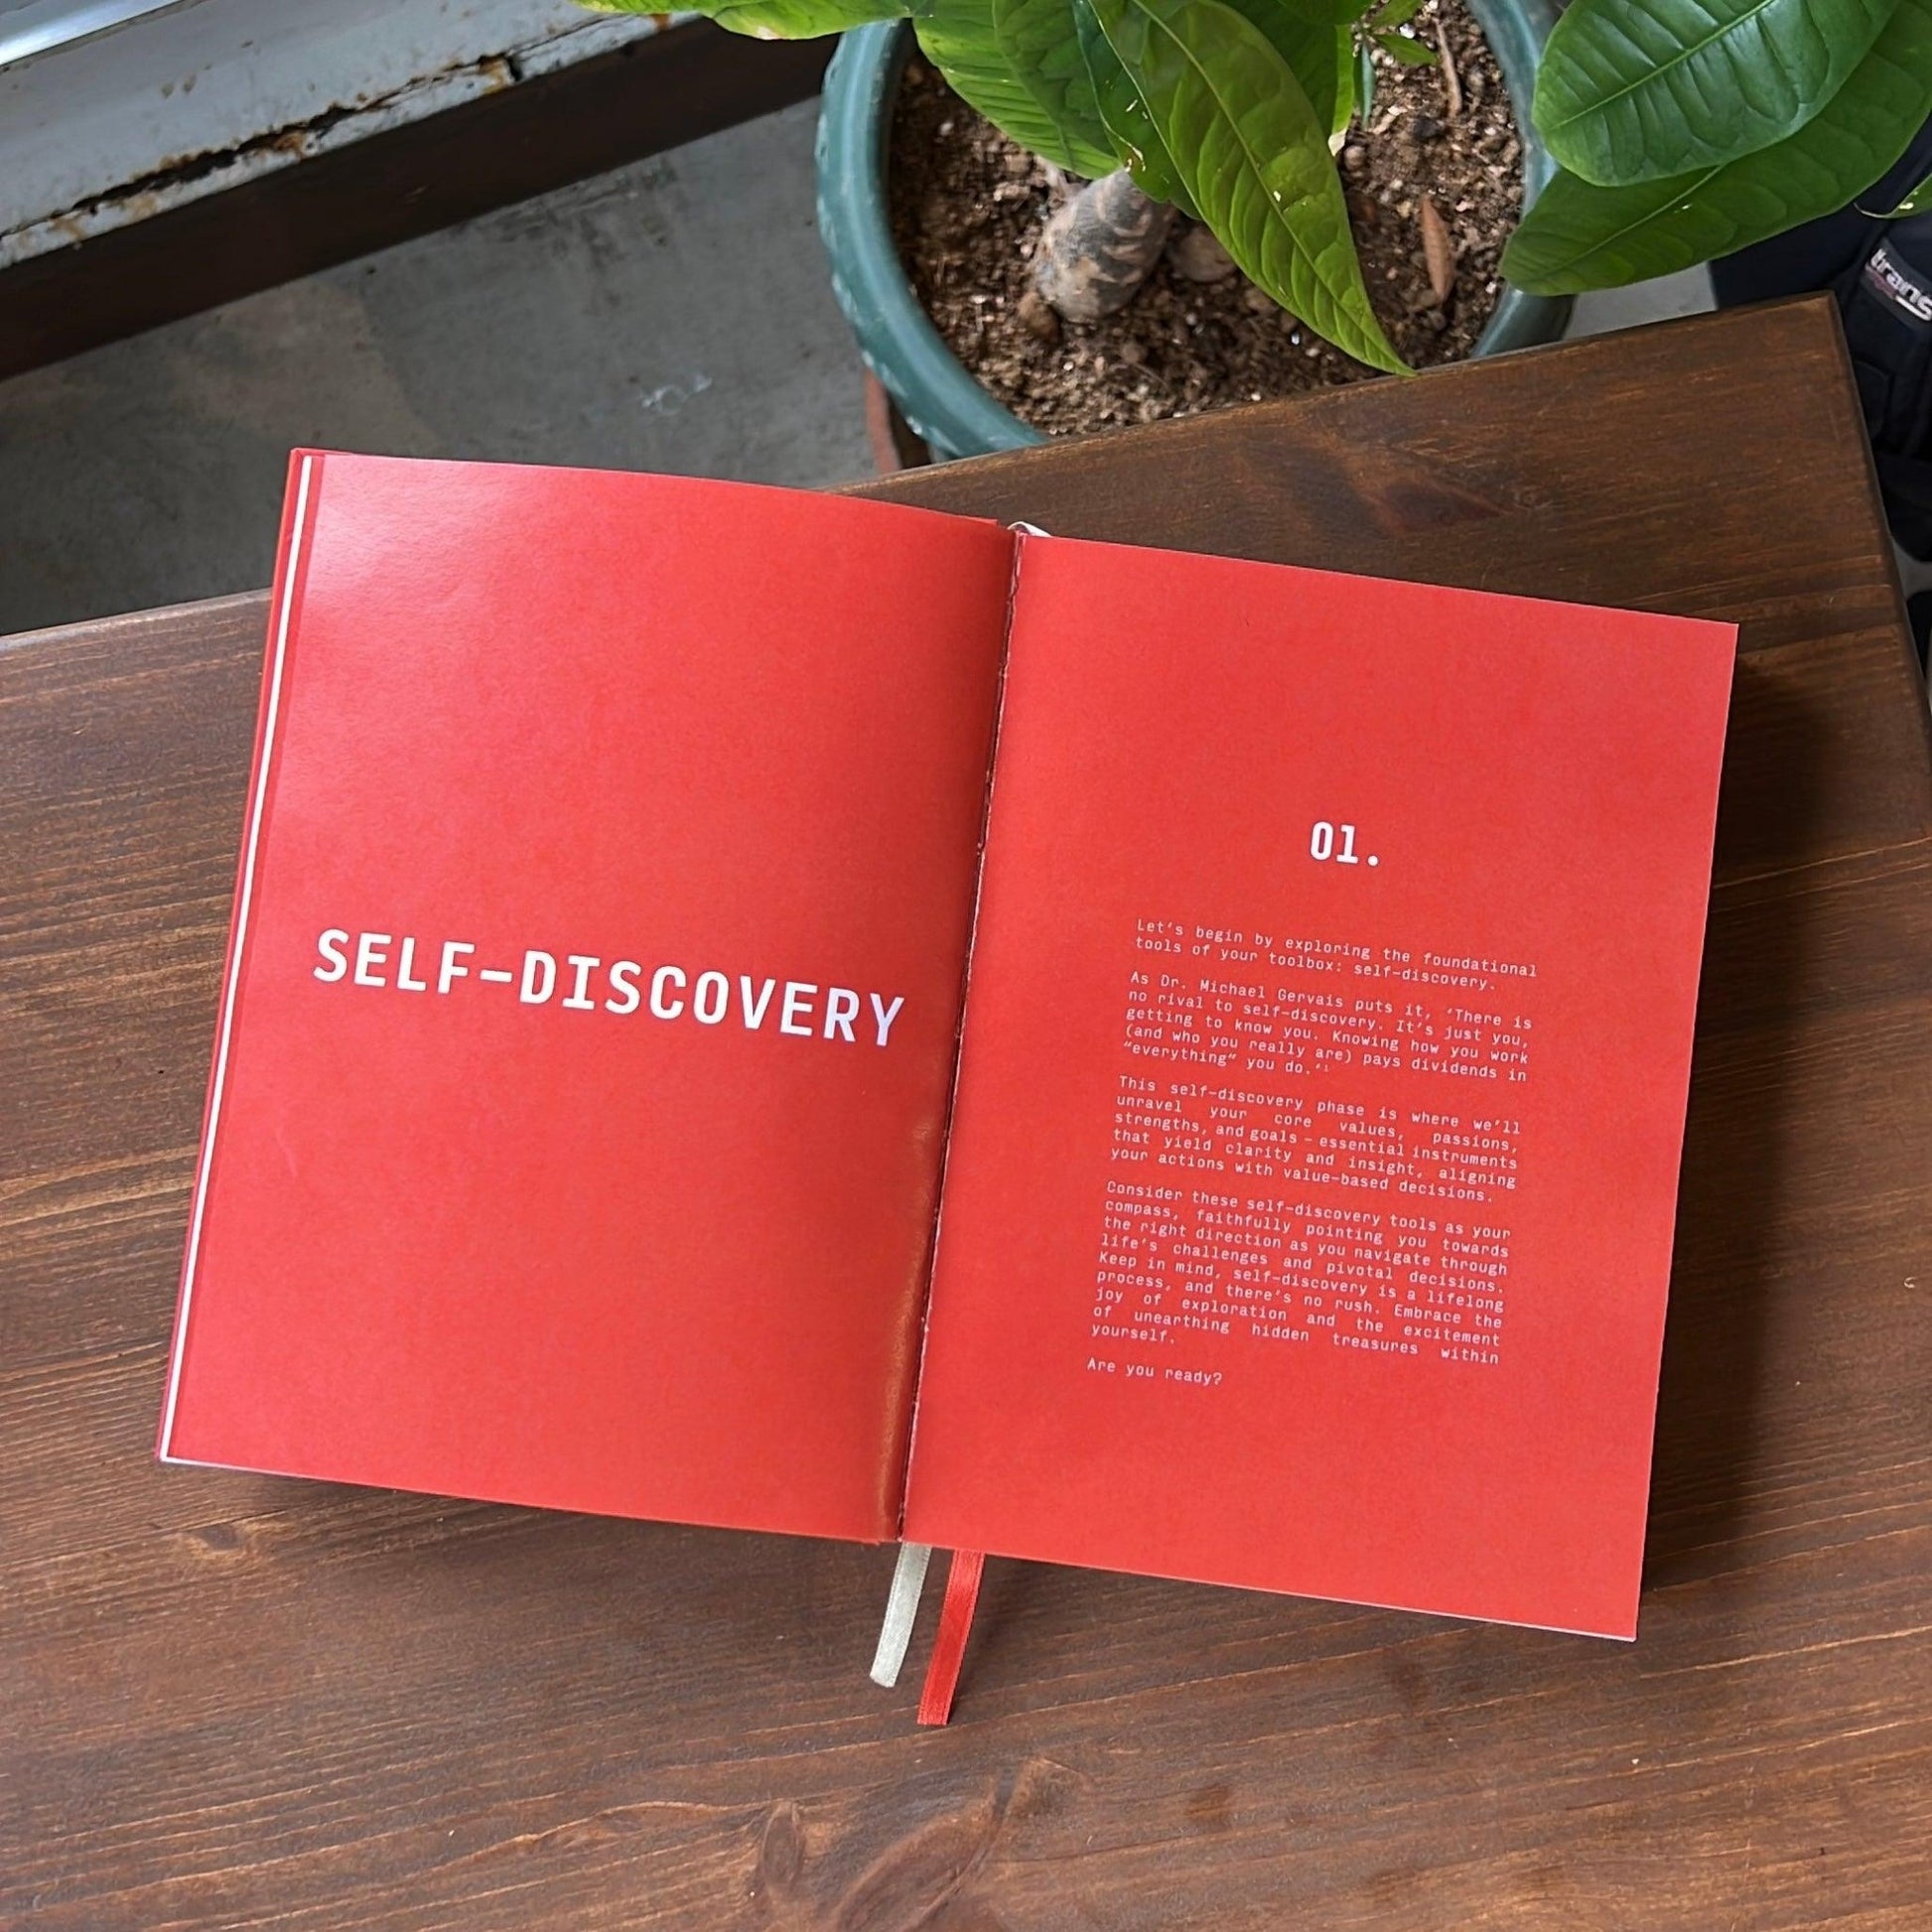 #guidedjournal #toolsforthejourney #goalsettingjournal #rachaeladams #journeystrength product photo - inside pages - self-discovery introduction - tools for the journey guided journal 